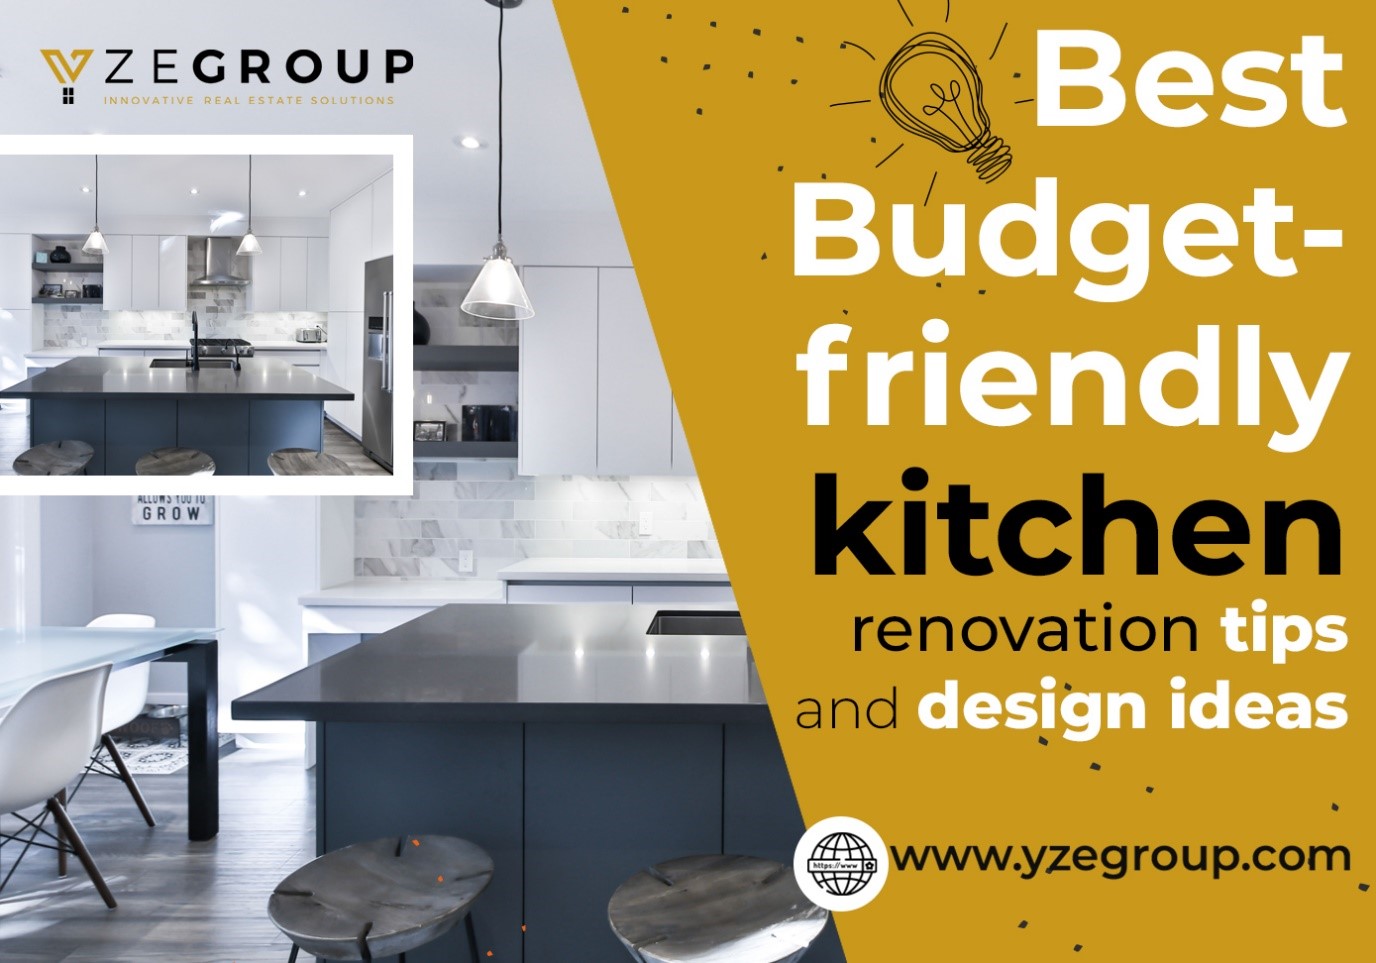 Best Budget-friendly kitchen renovation tips and design ideas